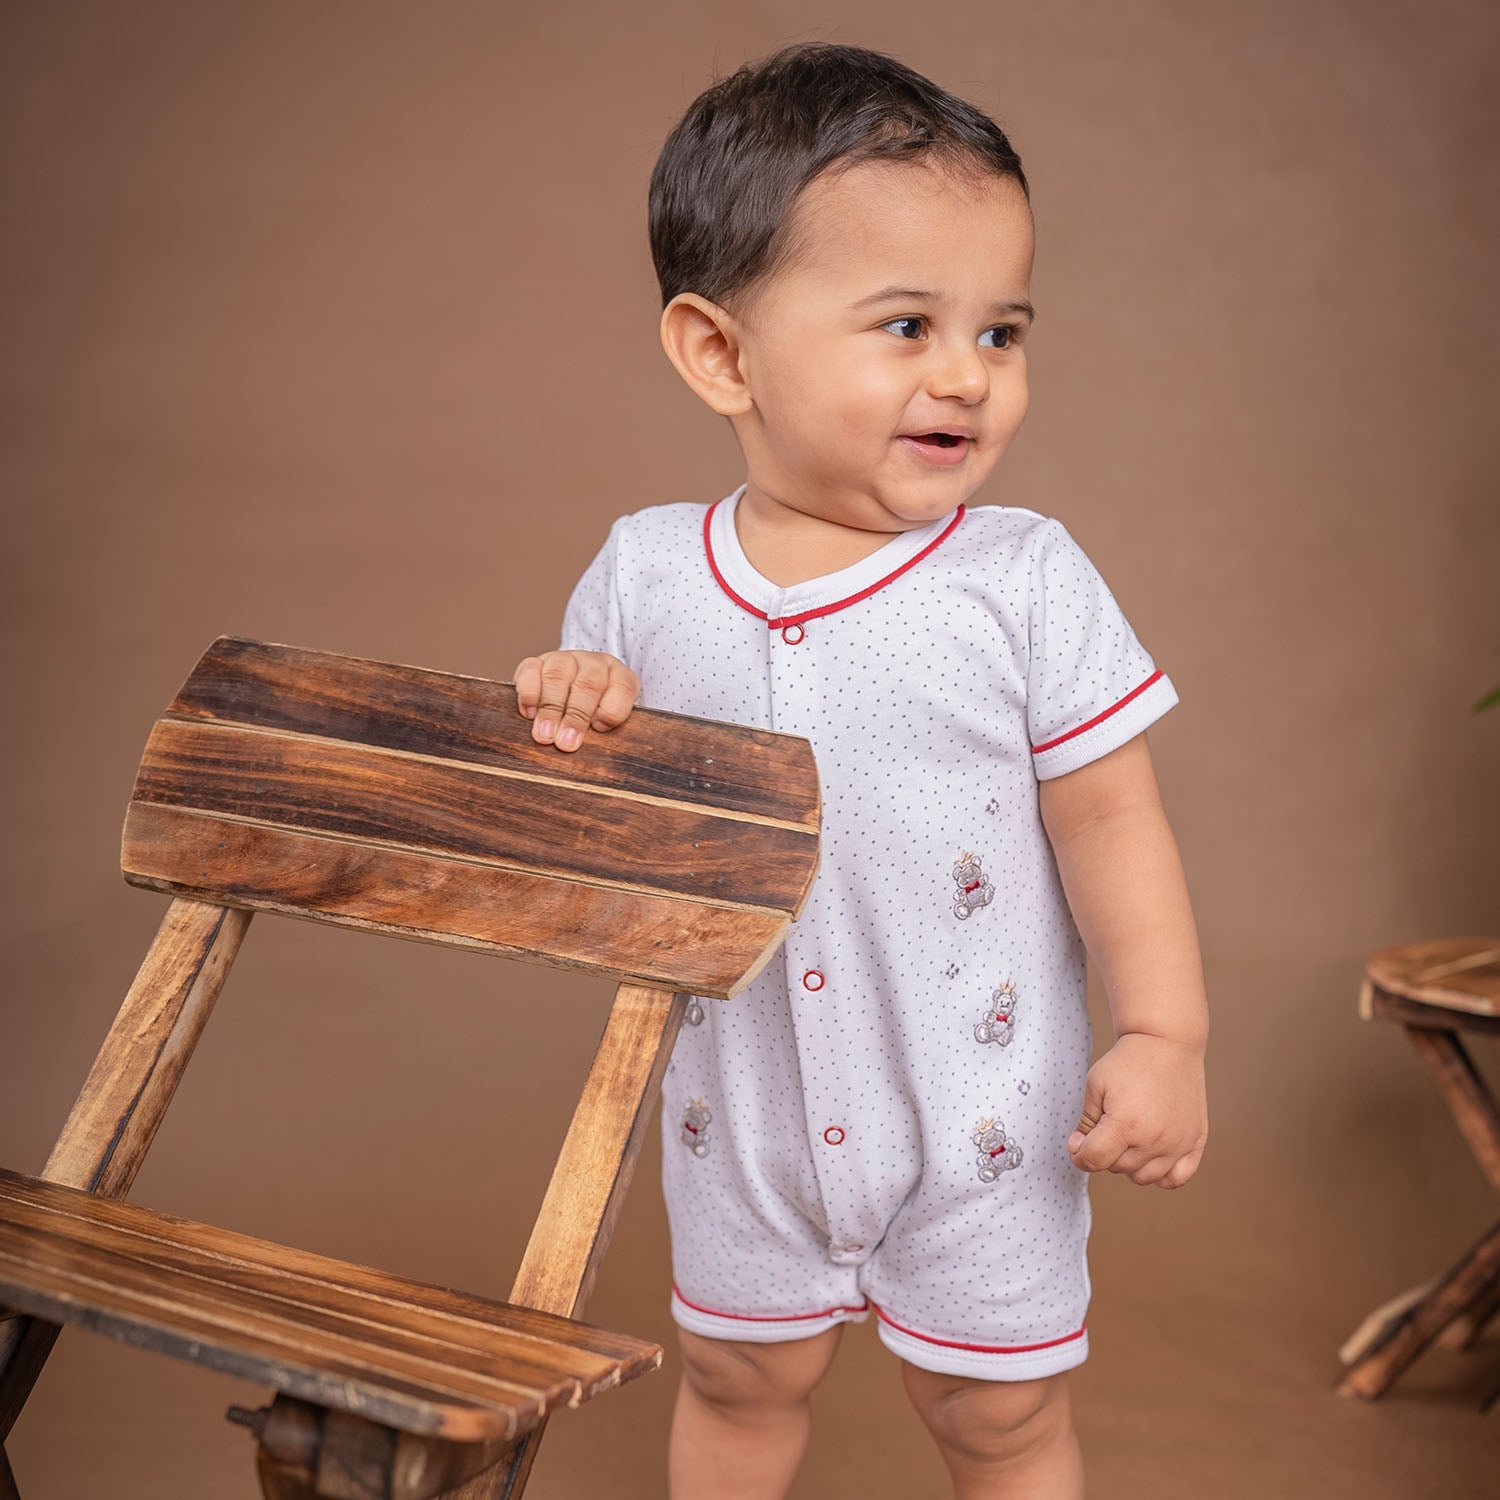 Baby Moo Star Teddy Embroidered Soft Cotton Short Romper - White